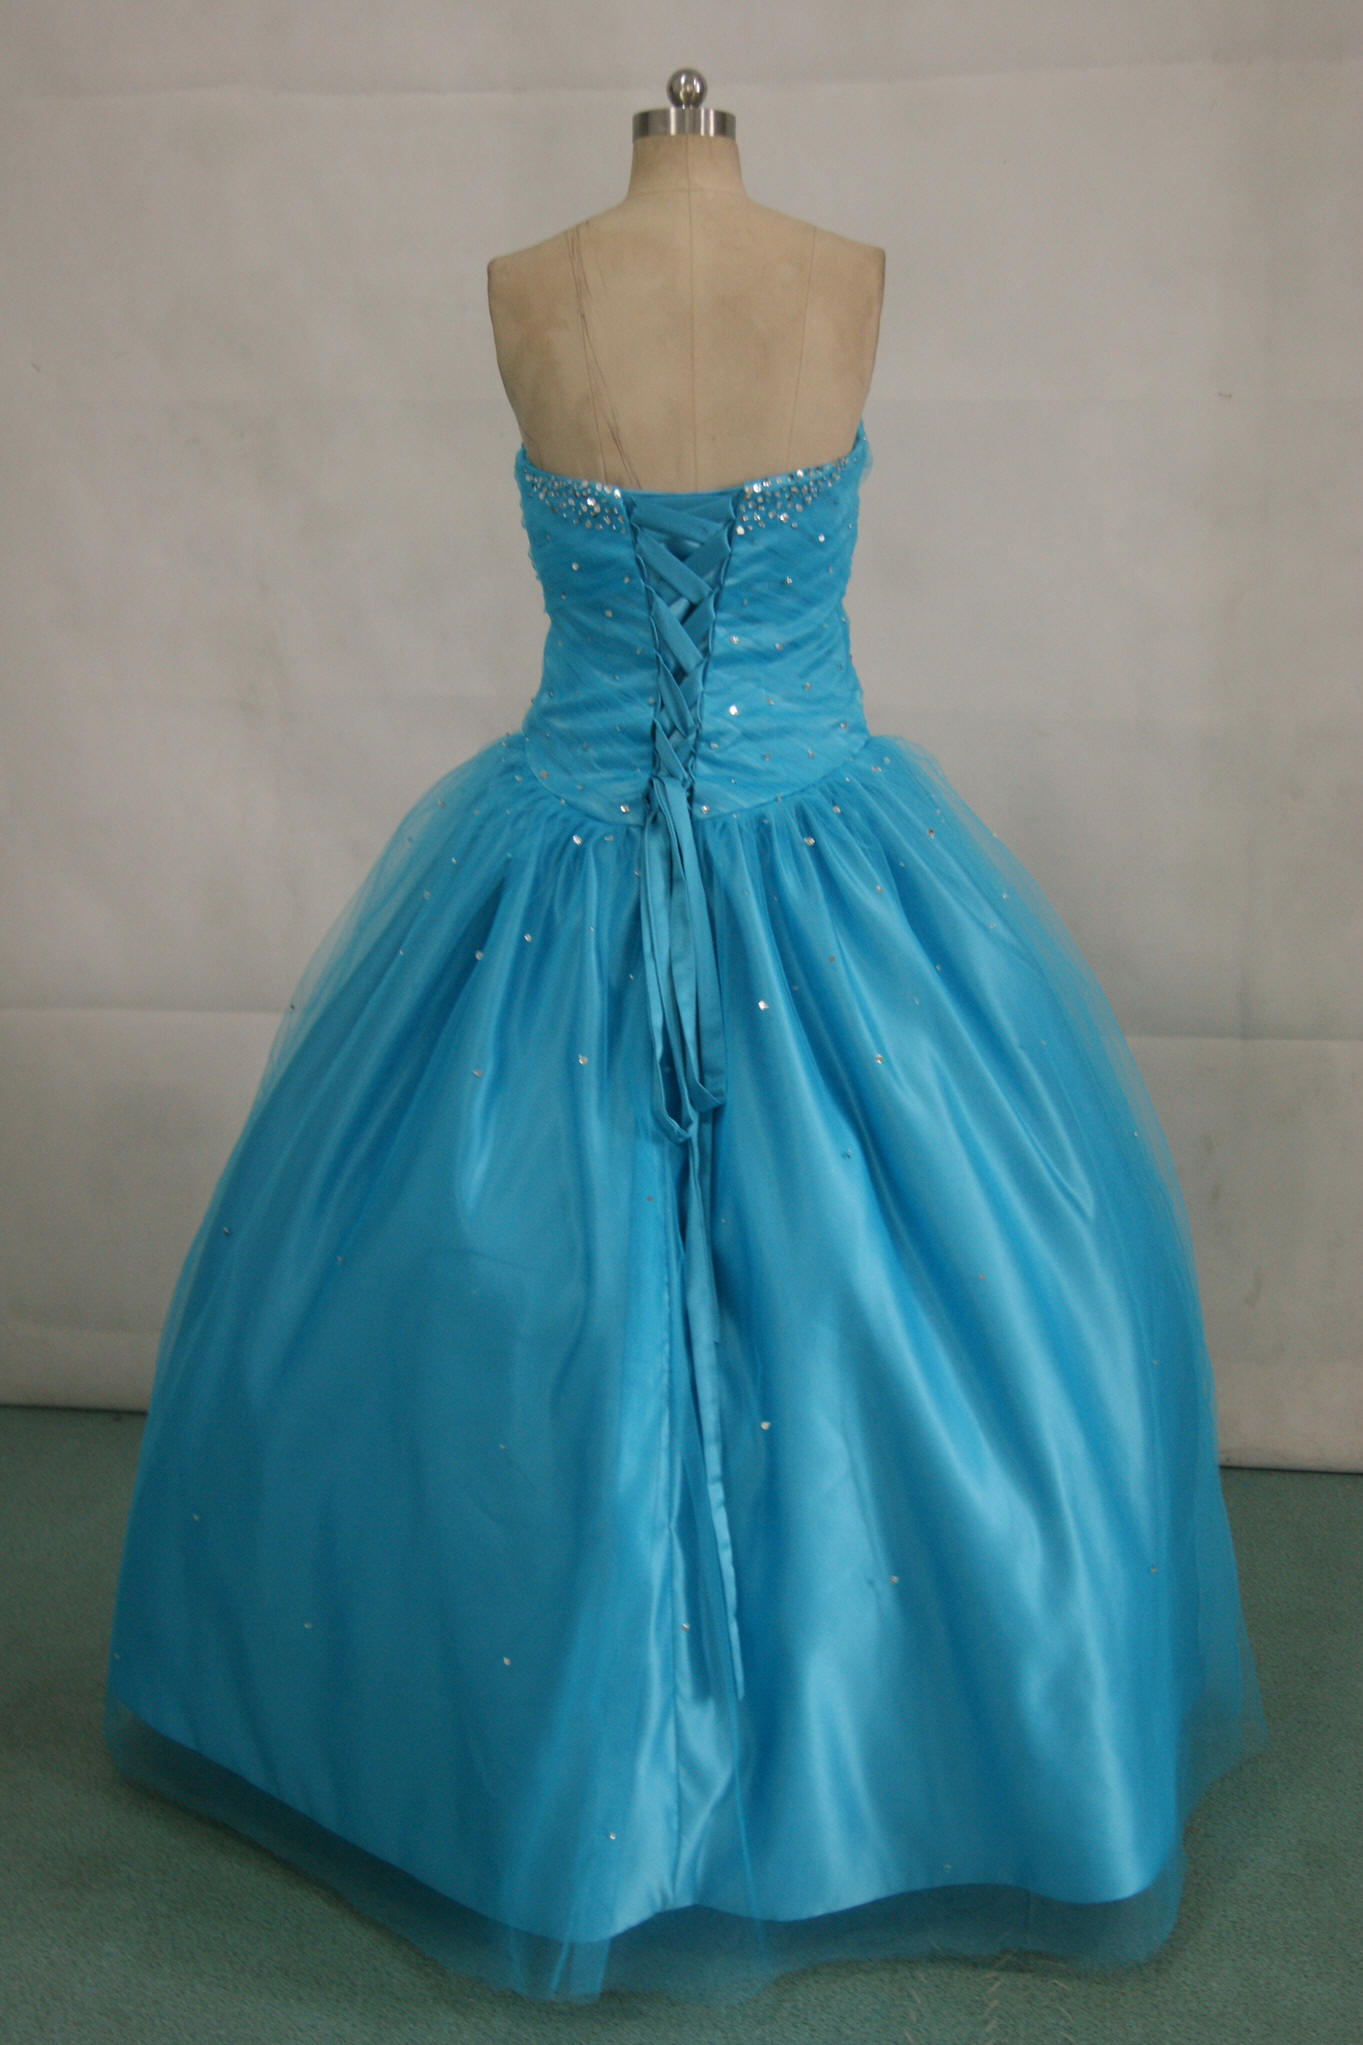 Peacock blue prom dress with silver beading